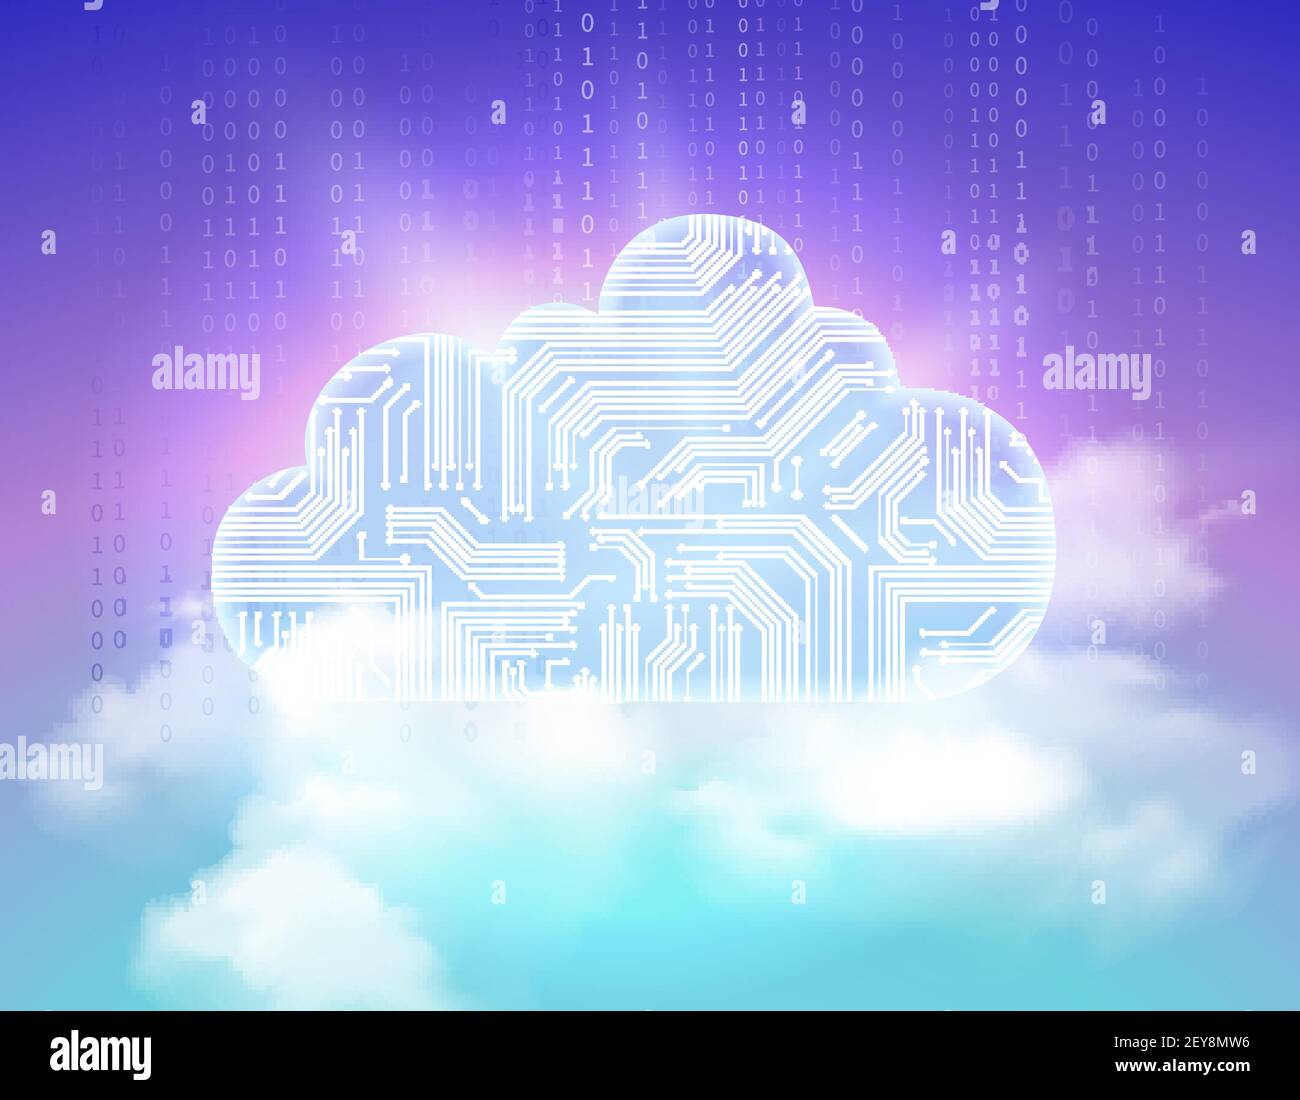 Safe data storage service shining electronic circuits cloud symbol above realistic sky radiant colorful background vector illustration Stock Vector